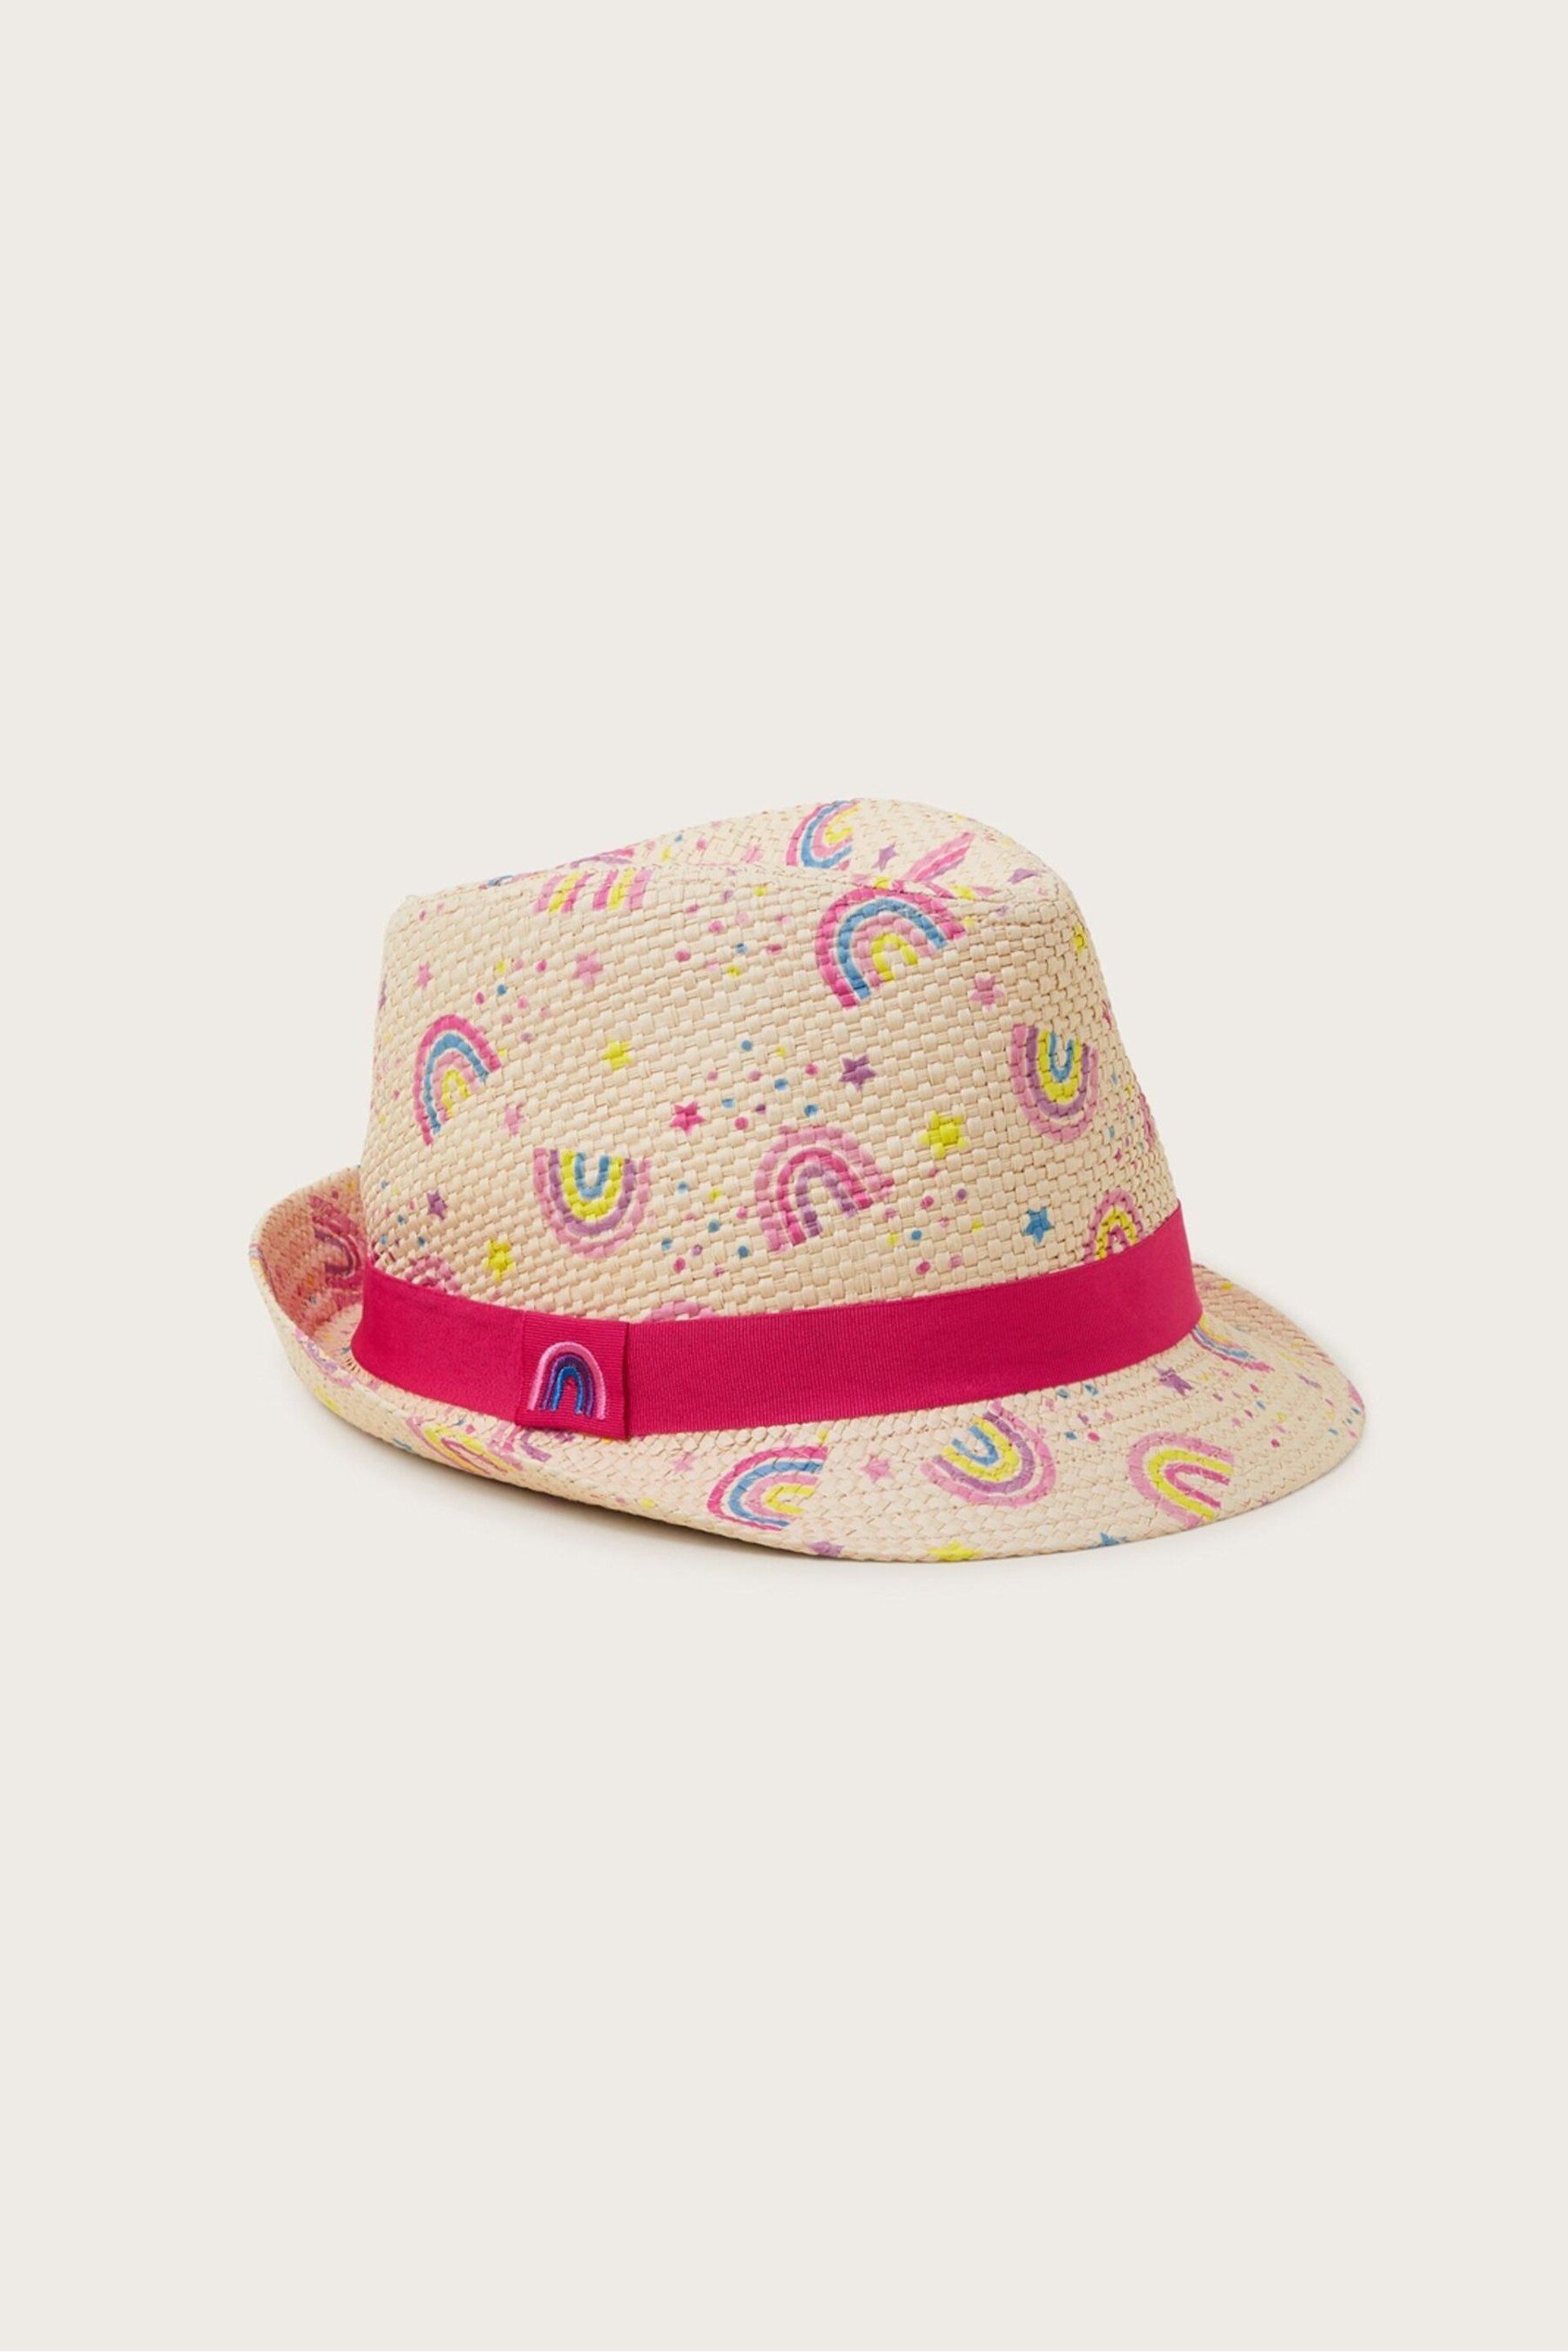 Monsoon Pink Rainbow Trilby Hat - Image 1 of 2